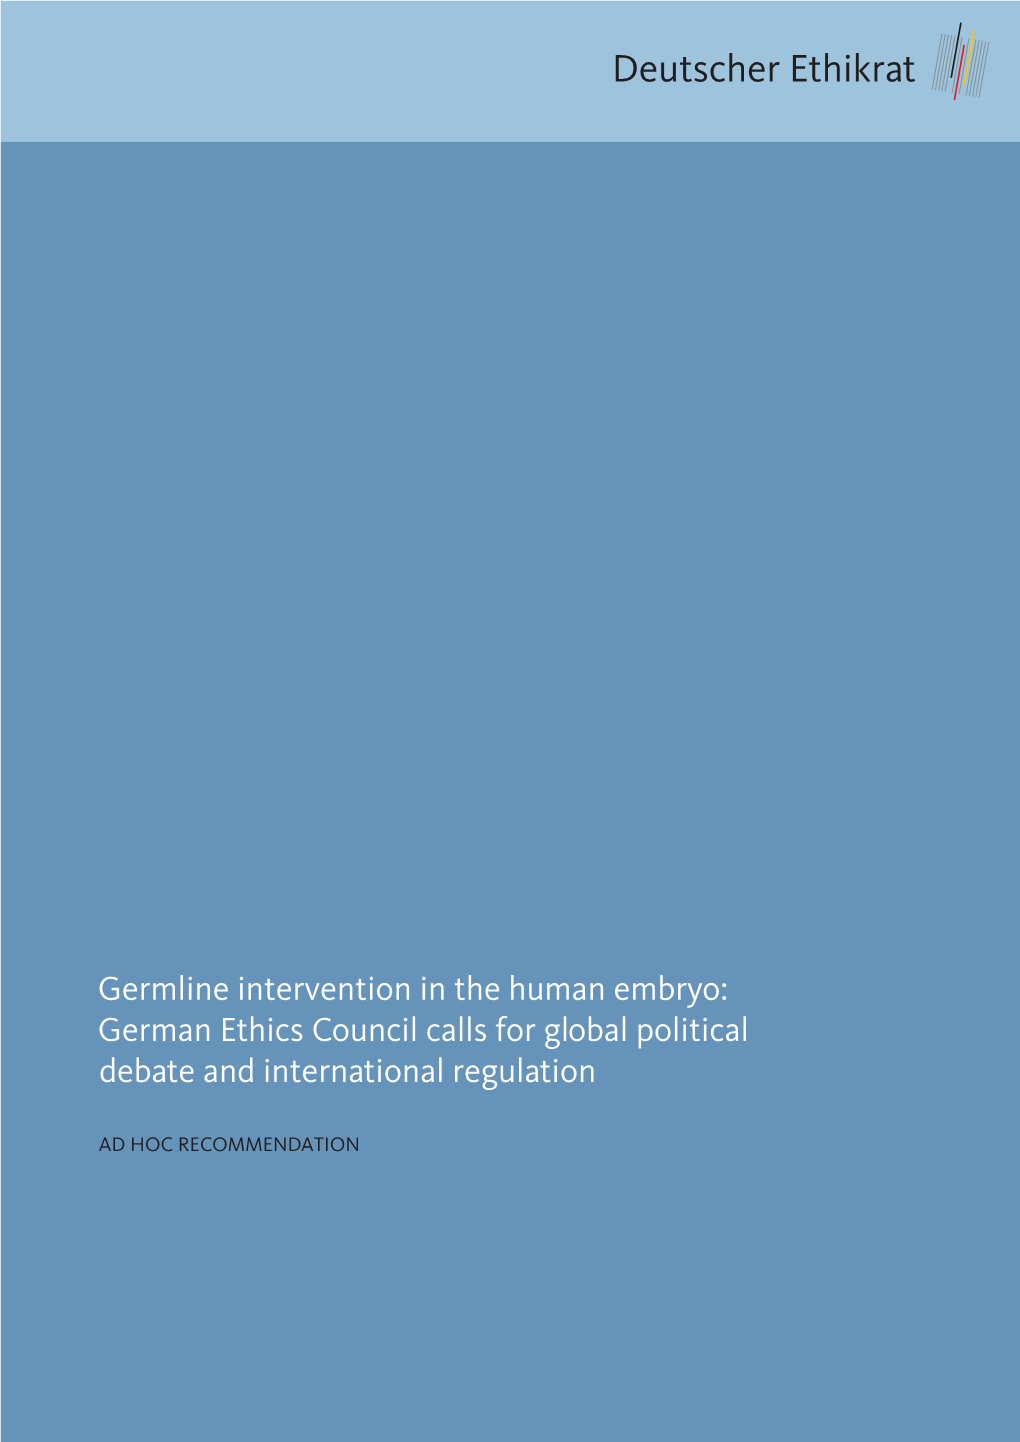 Germline Intervention in the Human Embryo: German Ethics Council Calls for Global Political Debate and International Regulation